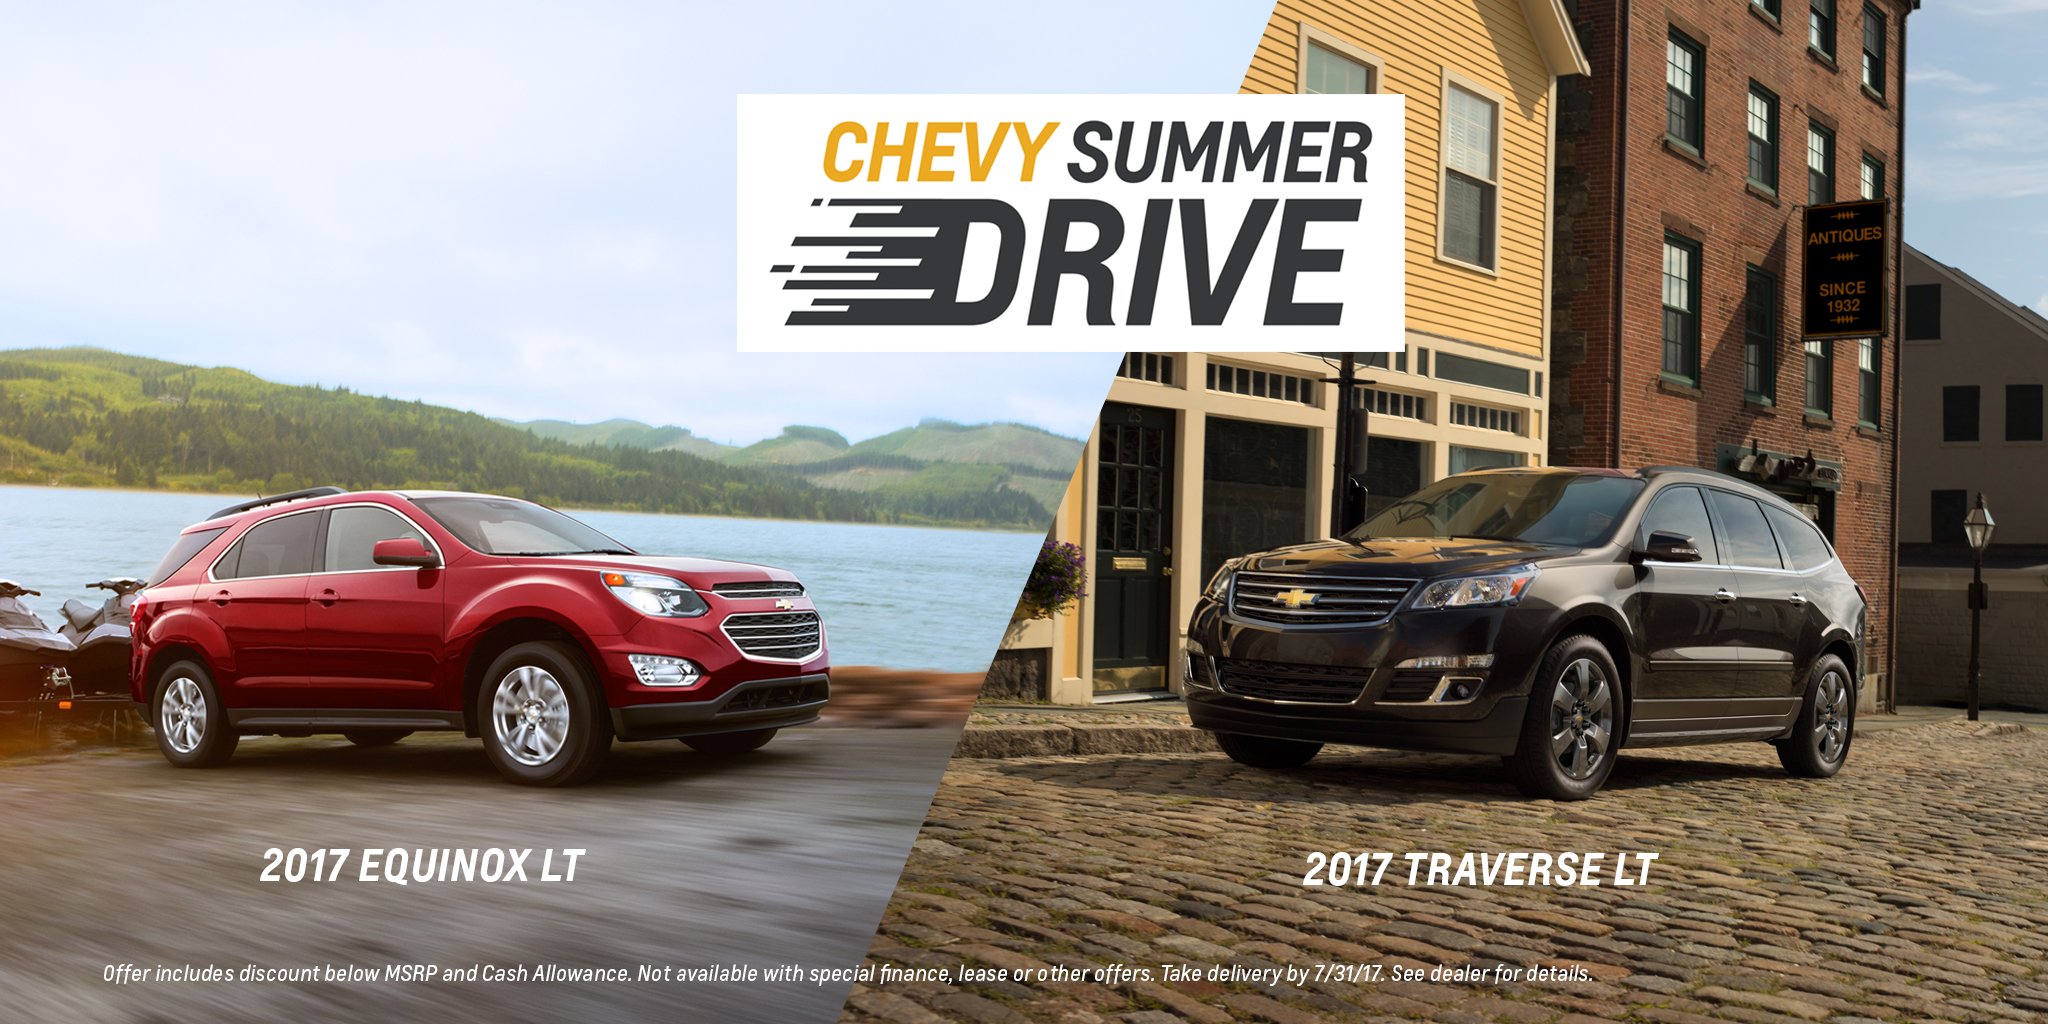 Hamby Automotive On Twitter It S The Chevy Summer Drive Now Get 15 Below Msrp On All 2017 Chevyequinox Lt And 2017 Chevytraverse Lt Models Https T Co M5dtxiikm9 Https T Co F4mcyntgmh